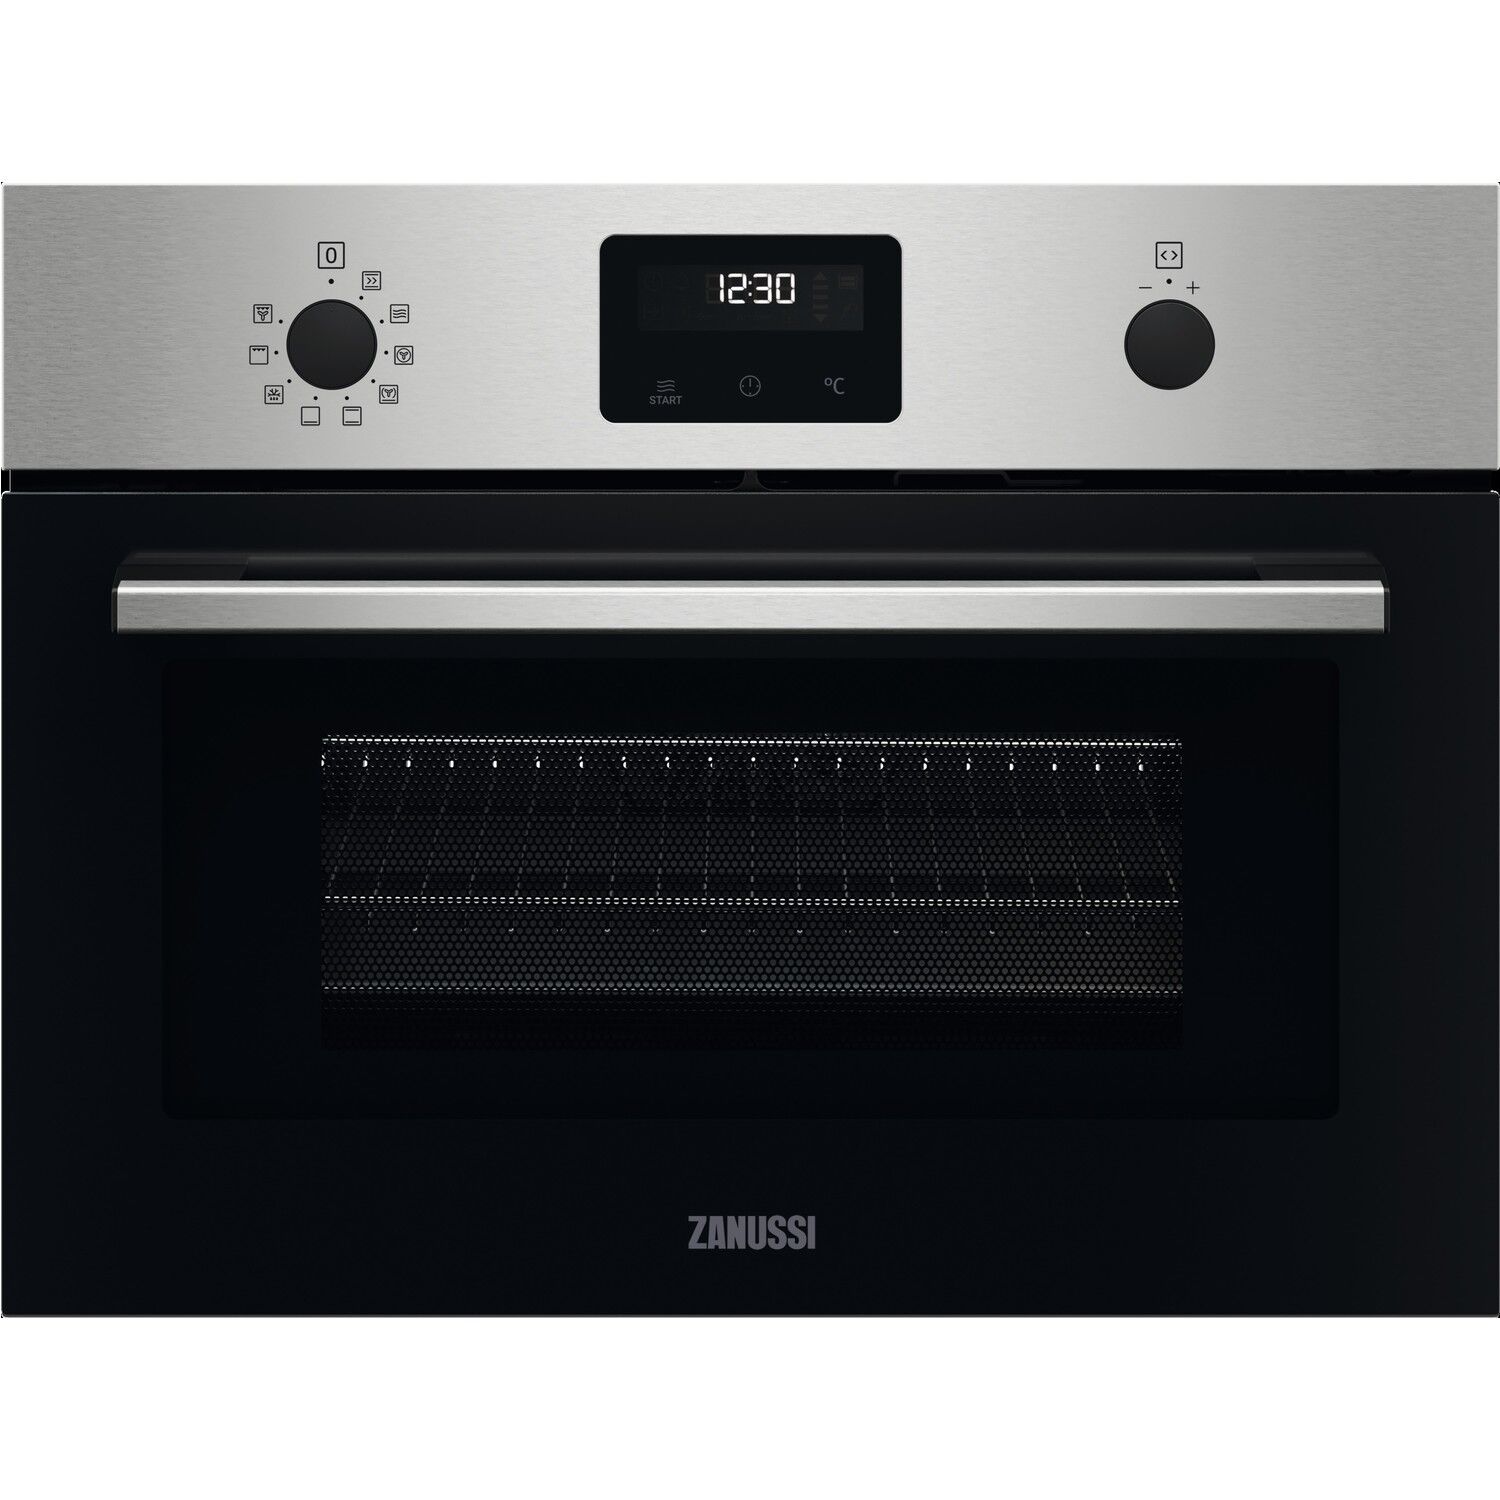 Zanussi Quickcook Compact Combination Microwave Oven and Grill - Stainless Steel